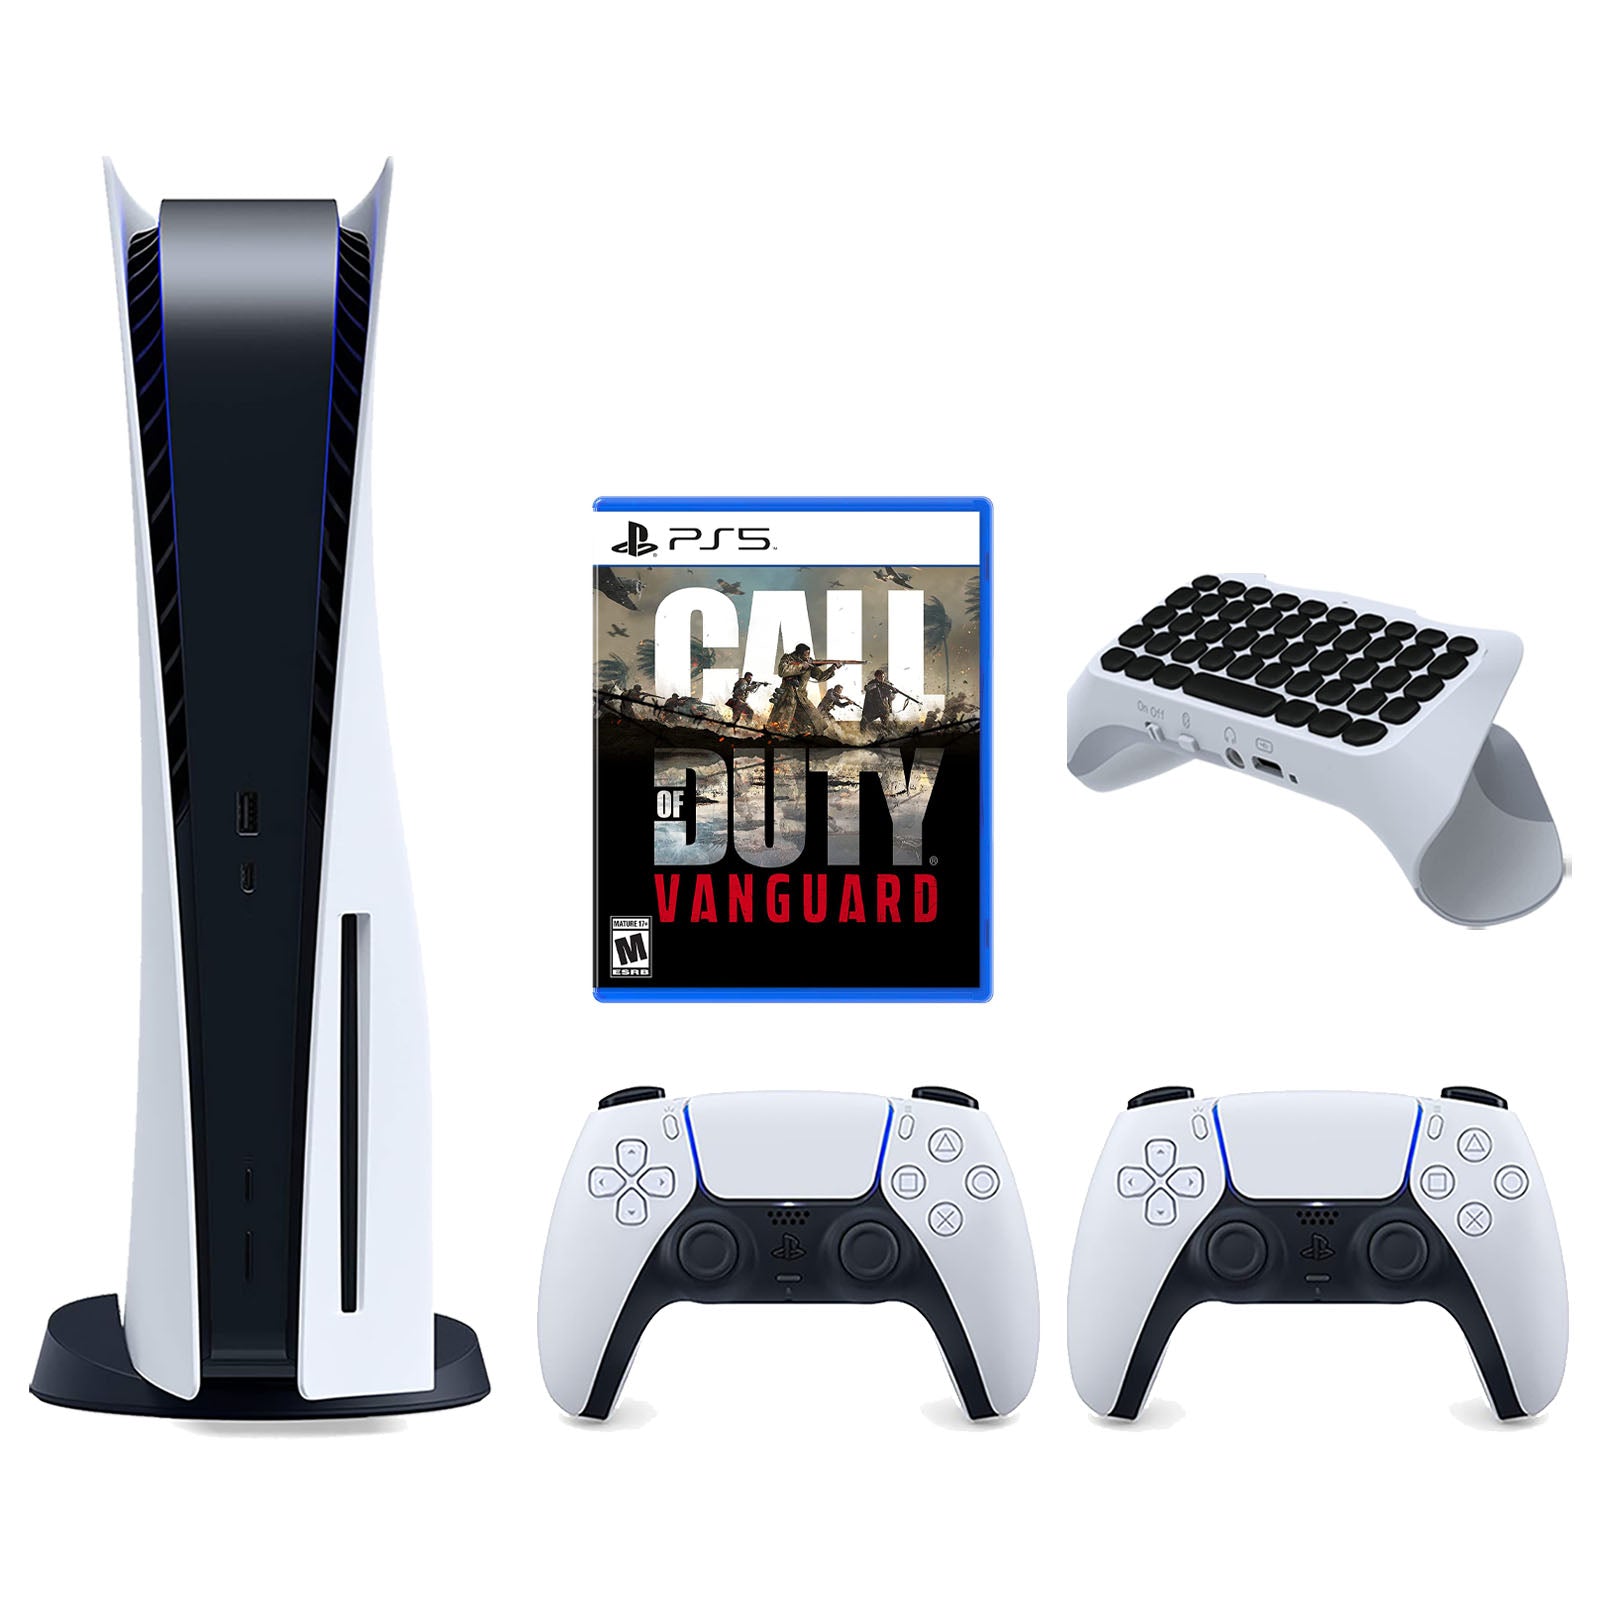 Sony Playstation 5 Disc Version Console with Extra White Controller, Surge QuickType 2.0 Wireless PS5 Controller Keypad and Call of Duty: Vanguard Bundle - Pro-Distributing